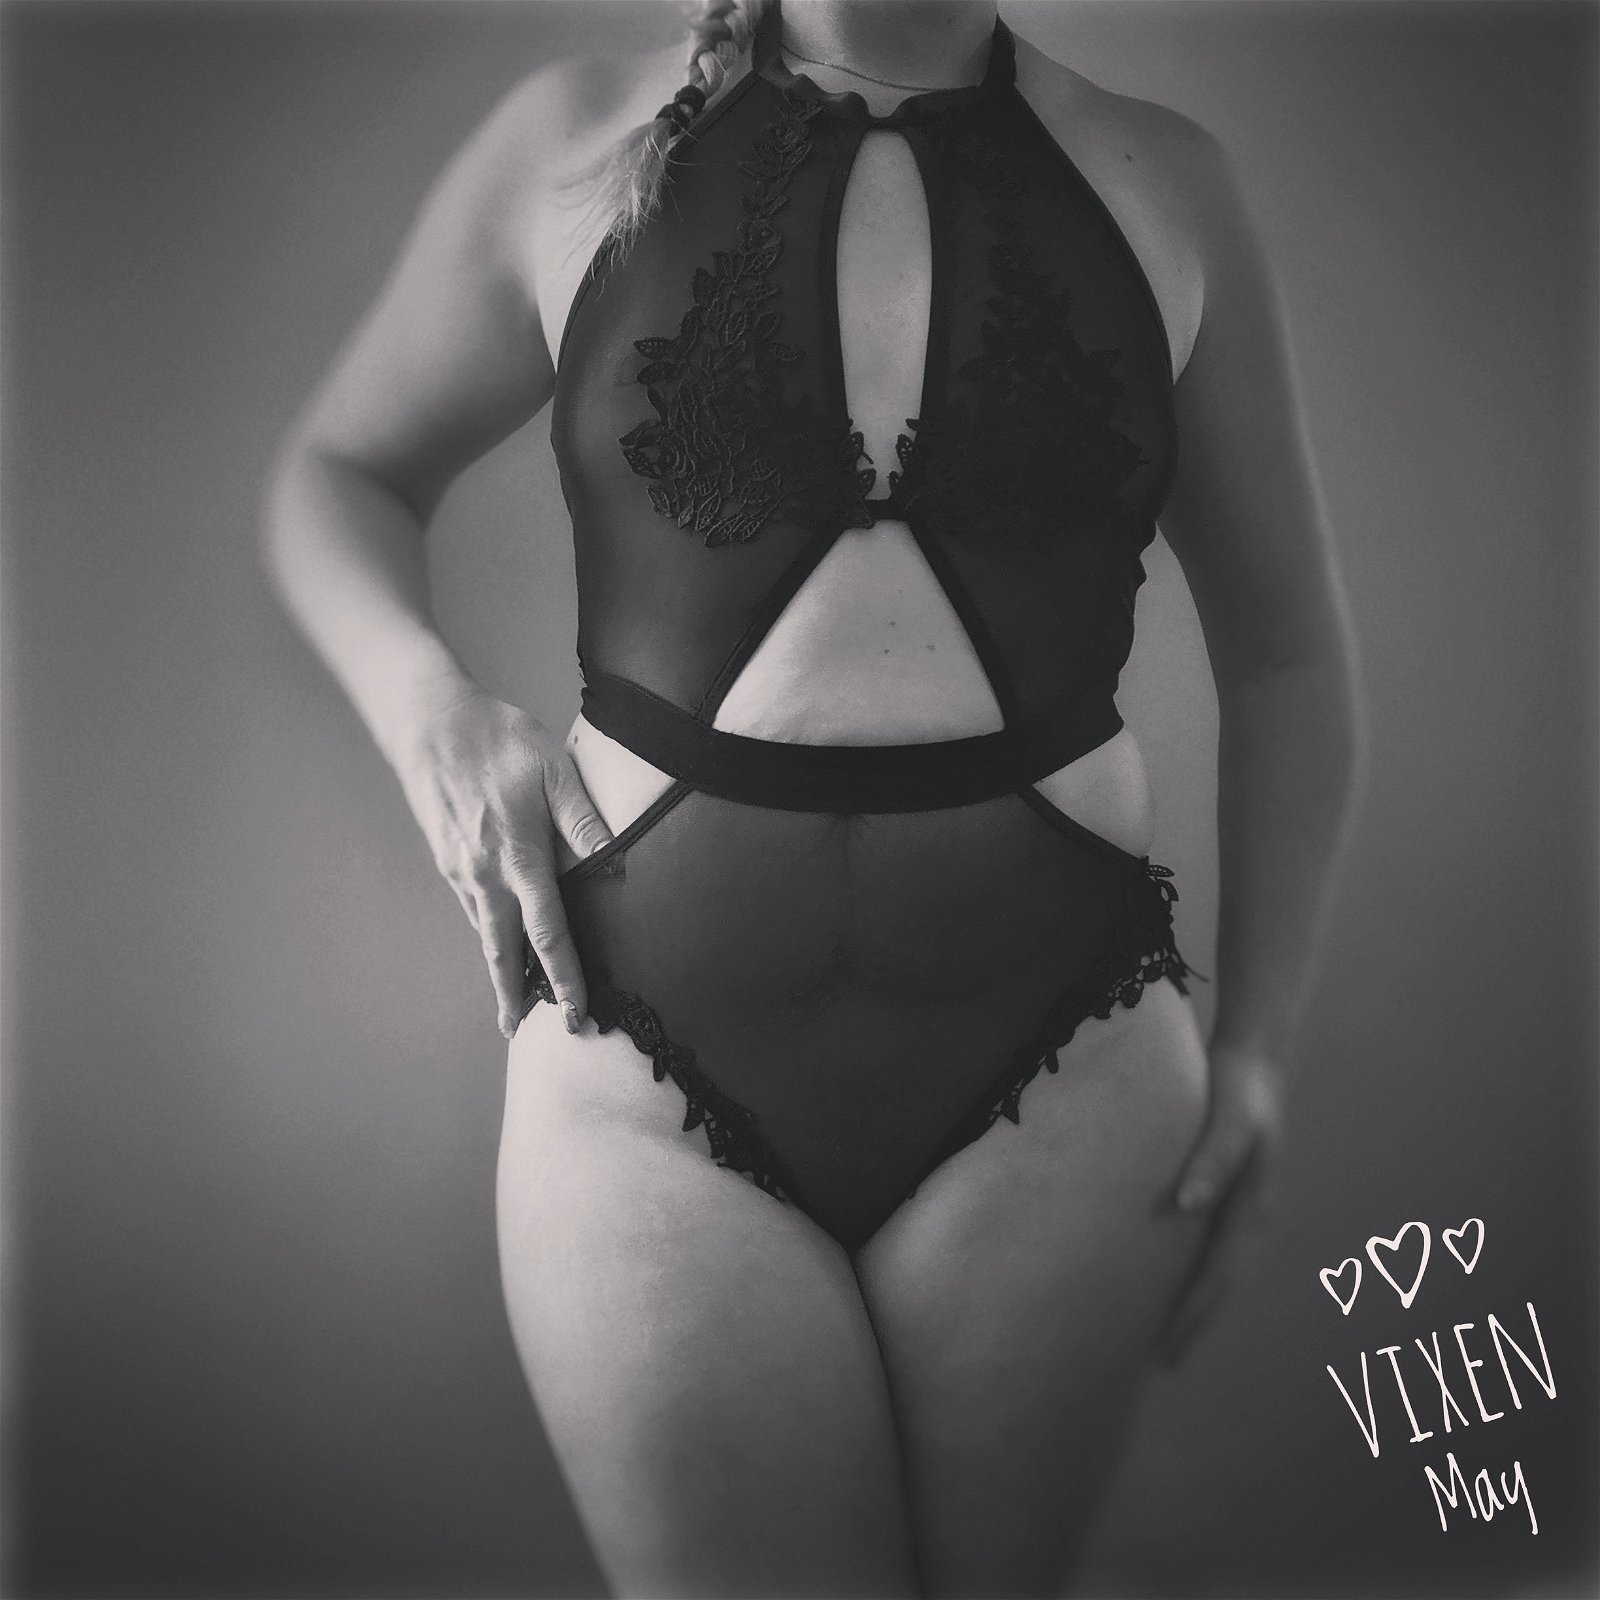 Watch the Photo by Vixen-May with the username @Vixen-May, who is a star user, posted on February 1, 2020 and the text says 'This is me! Hot wife sex goddess panty seller key holder'